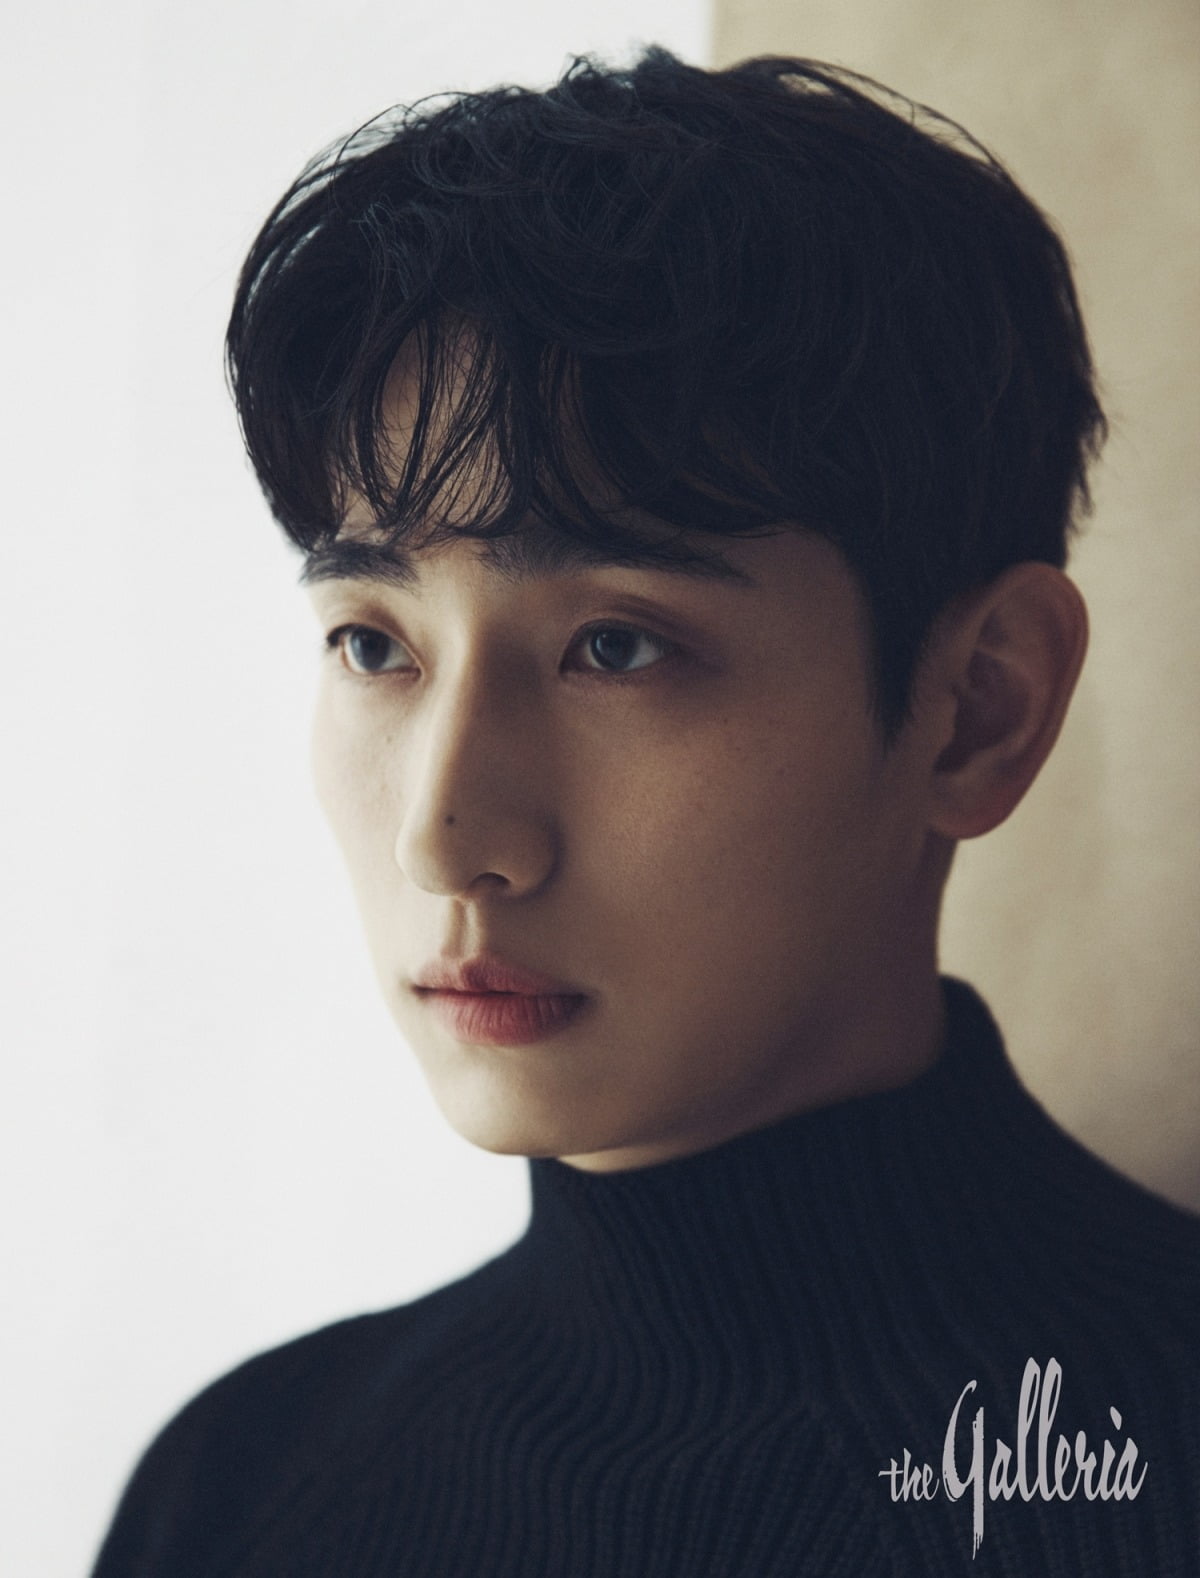 Yoon Park "I still have a goal of continuing to act until I'm 80"